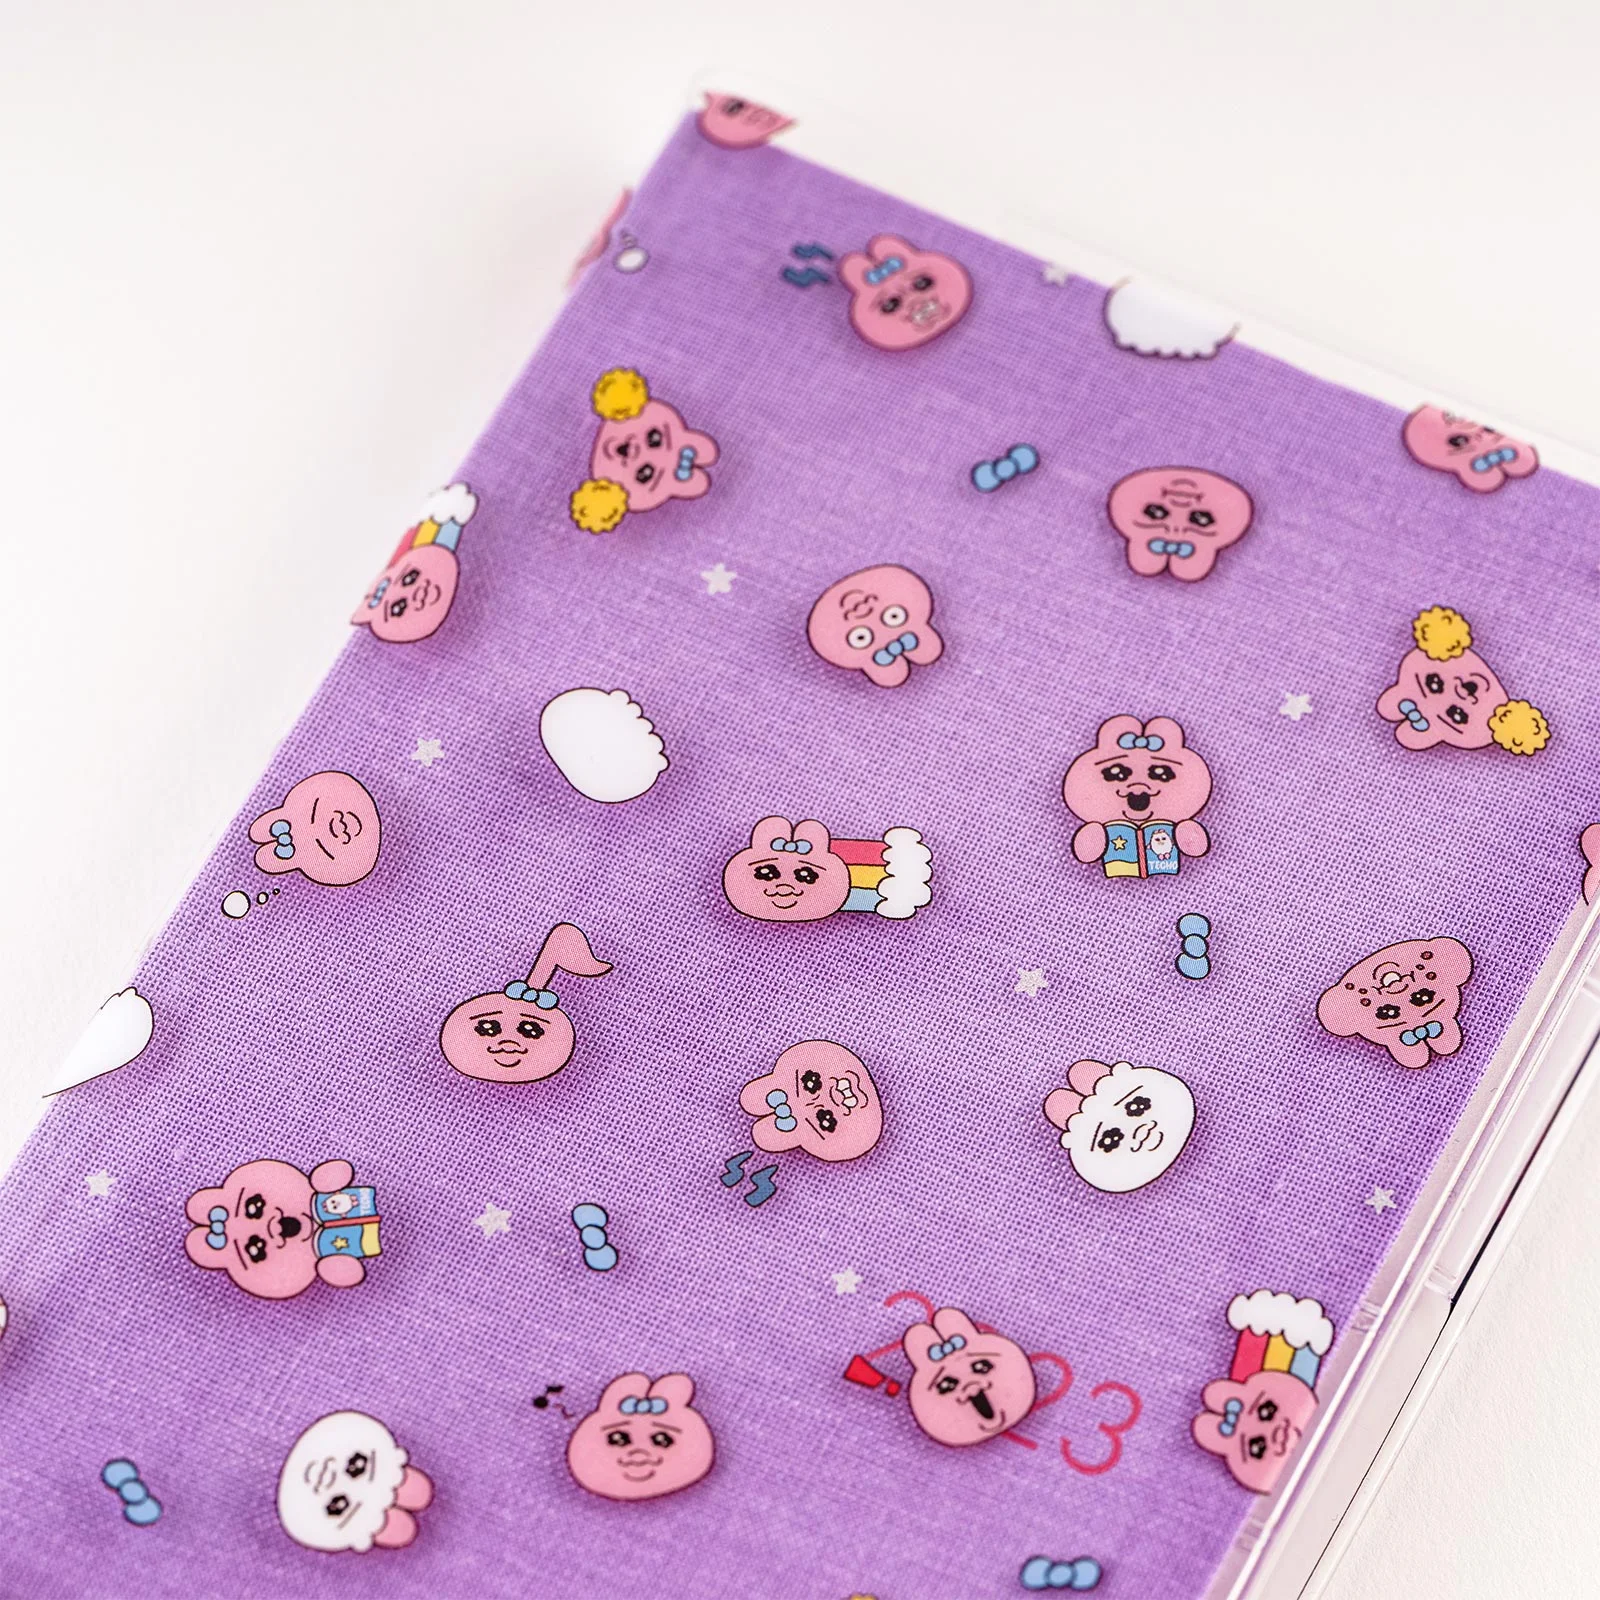 Hobonichi: Clear Cover “Circling Stars” for Weeks - Accessories Lineup - Hobonichi  Techo 2018